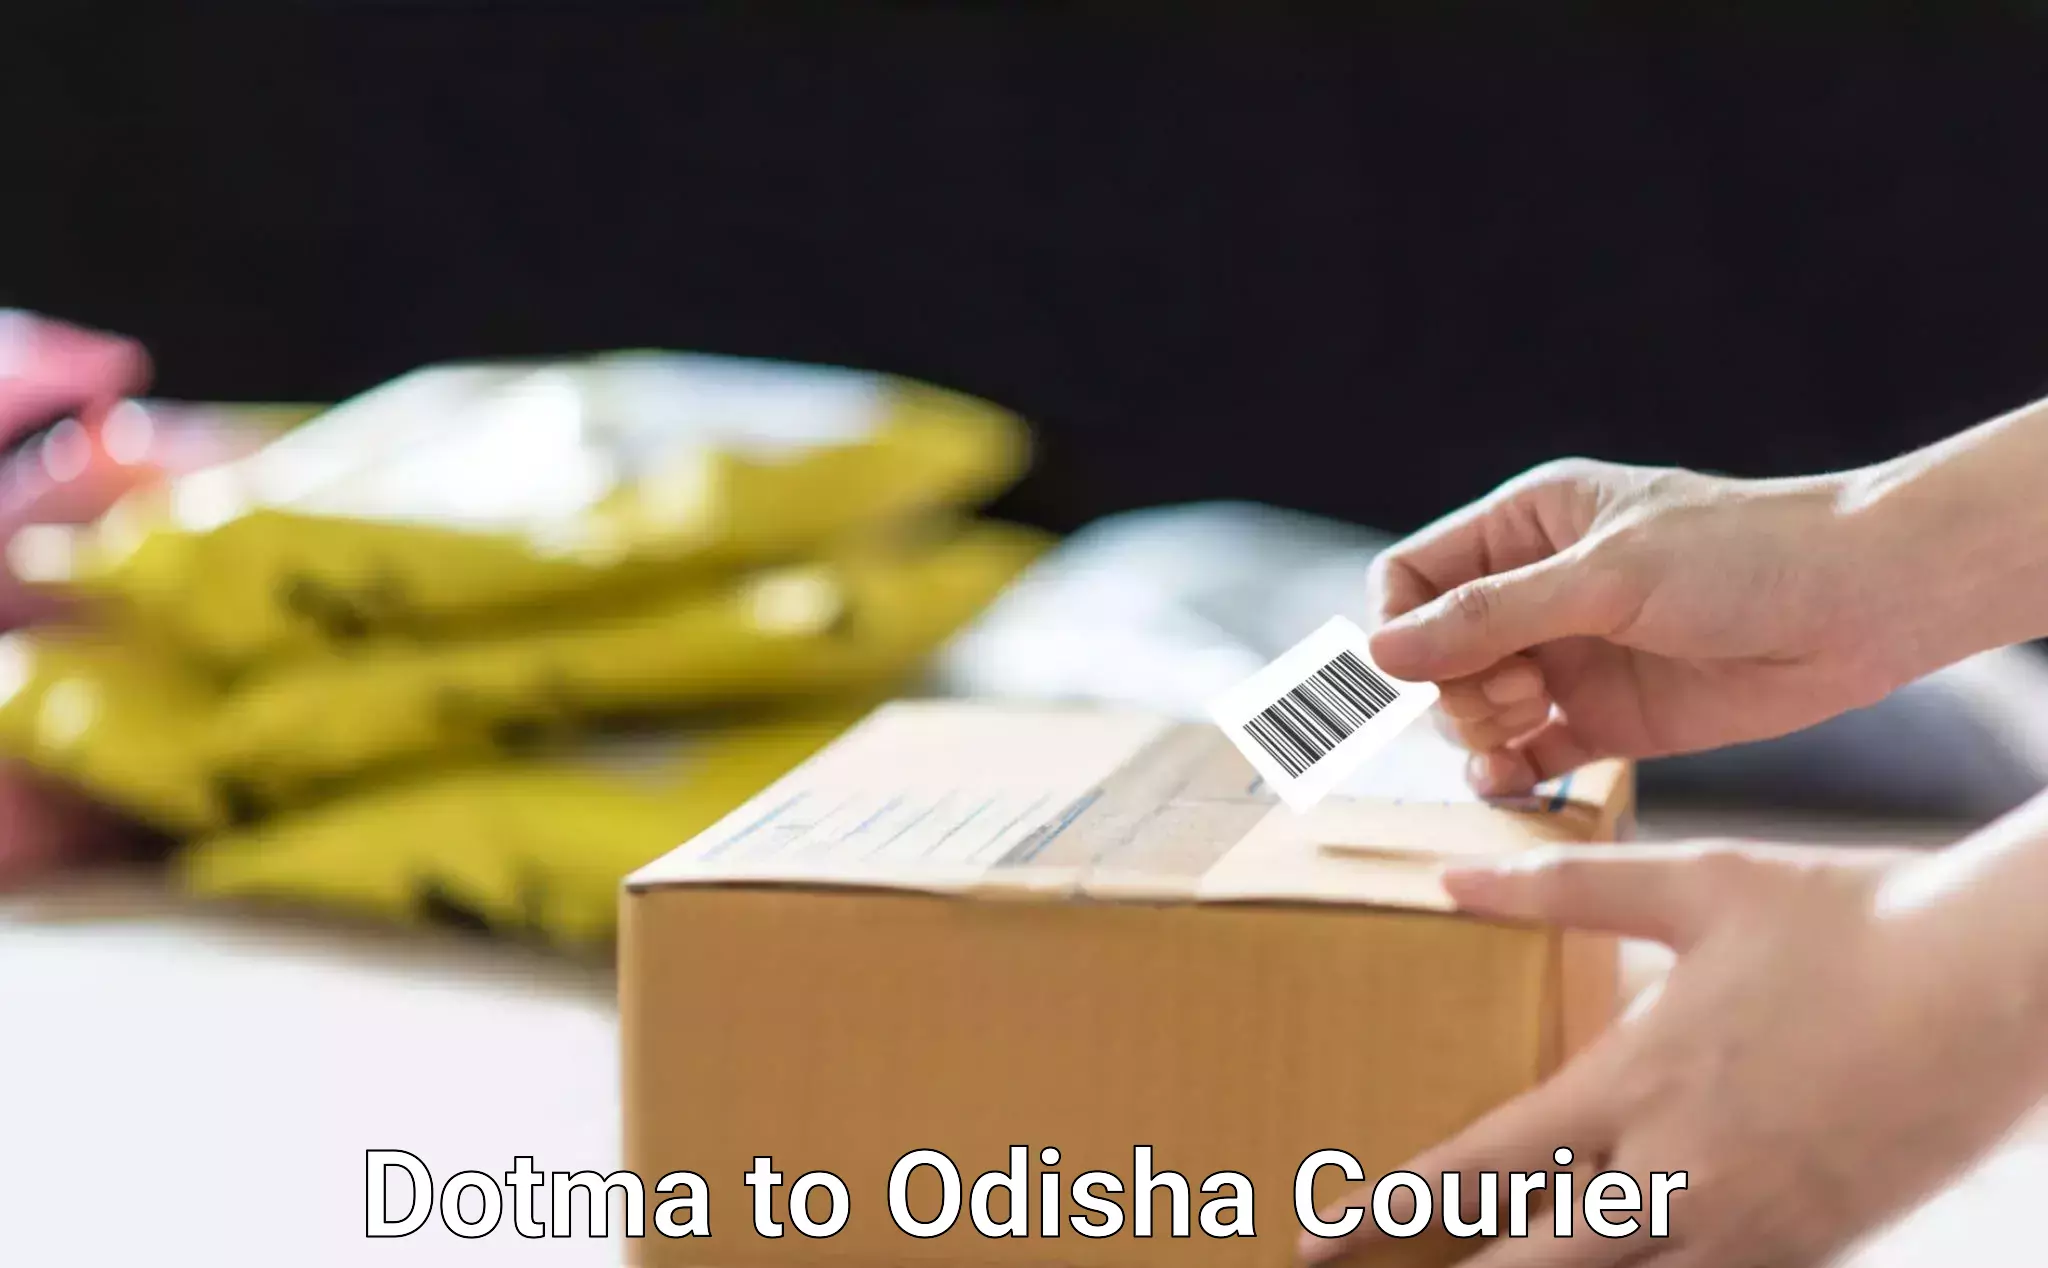 Optimized shipping services Dotma to Chandinchowk